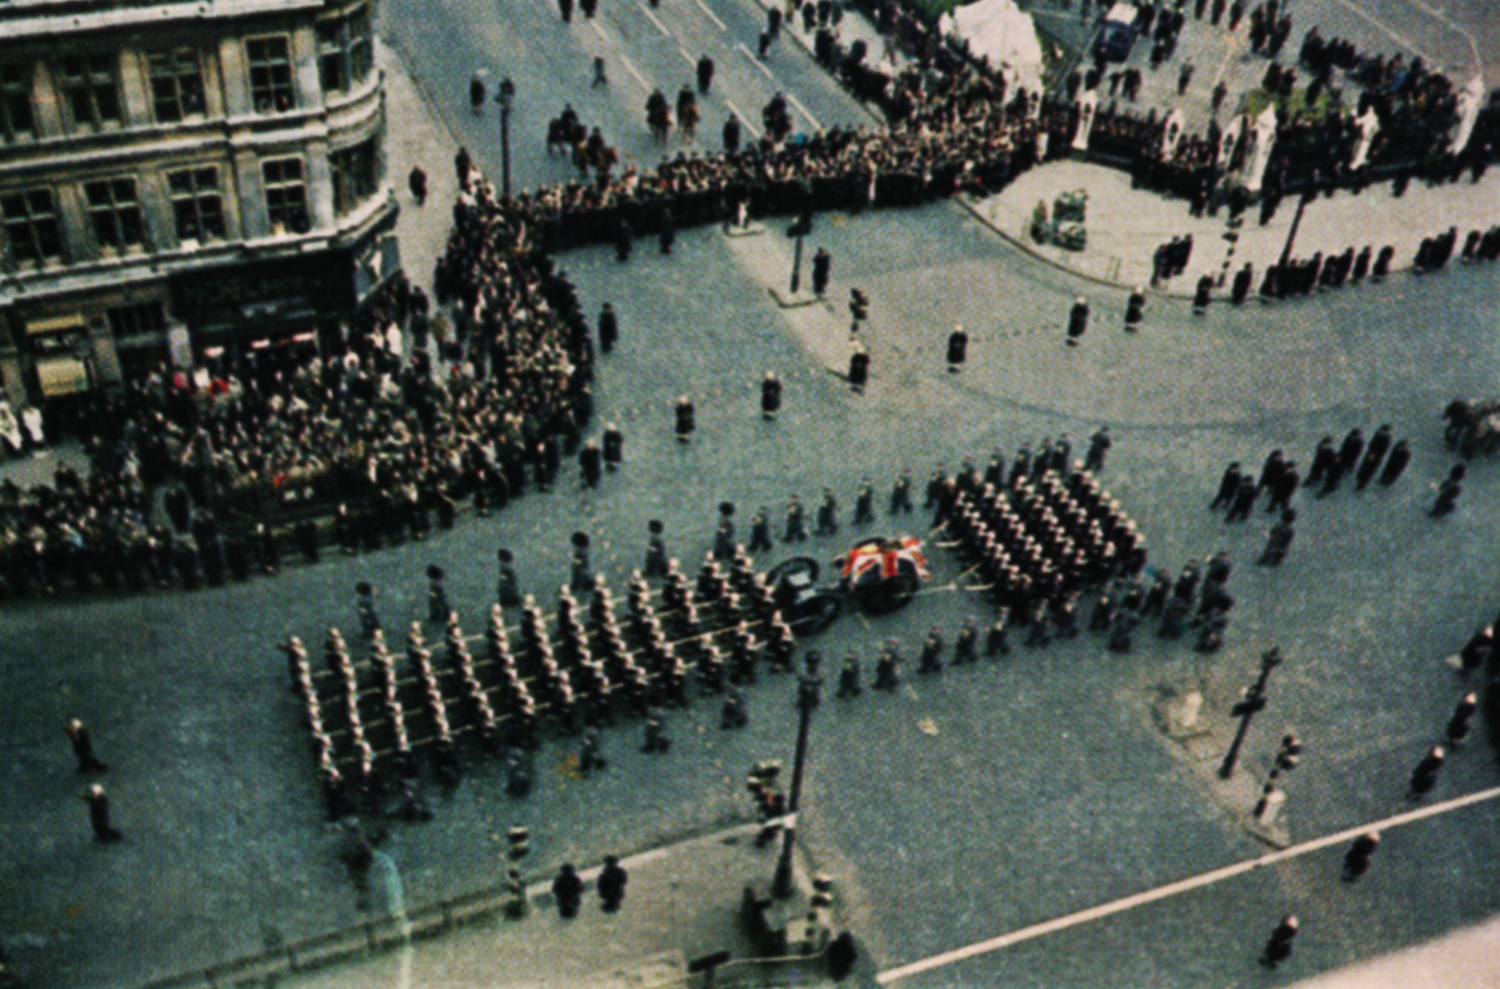 Aerial view of the procession, in colour